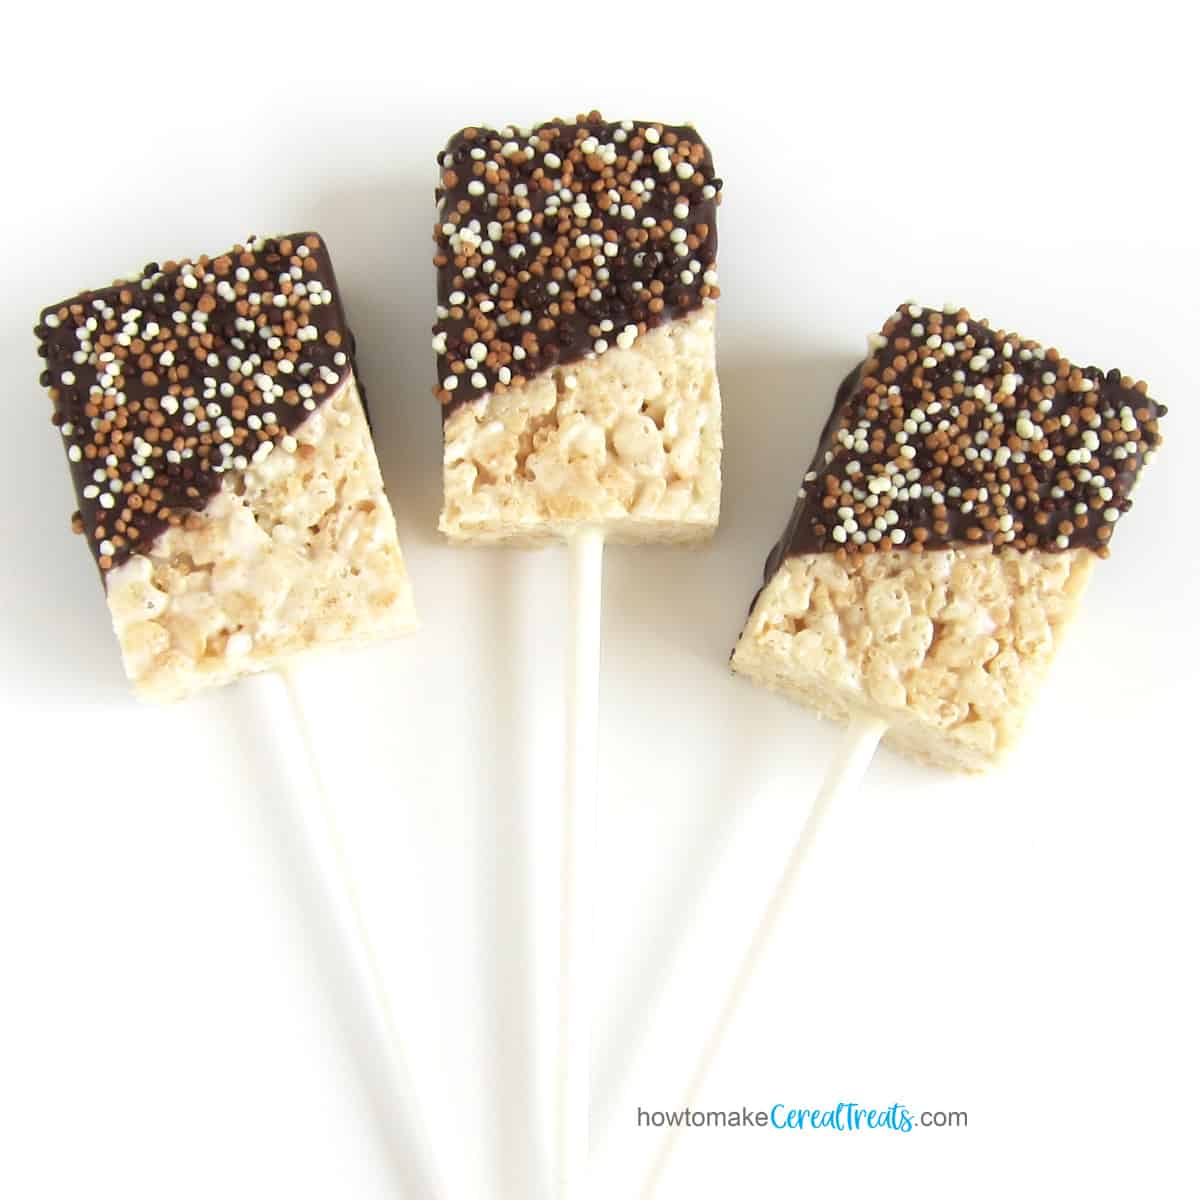 Chocolate-dipped Rice Krispie Treat pops on a stick topped with milk, dark, and white Crispearls.